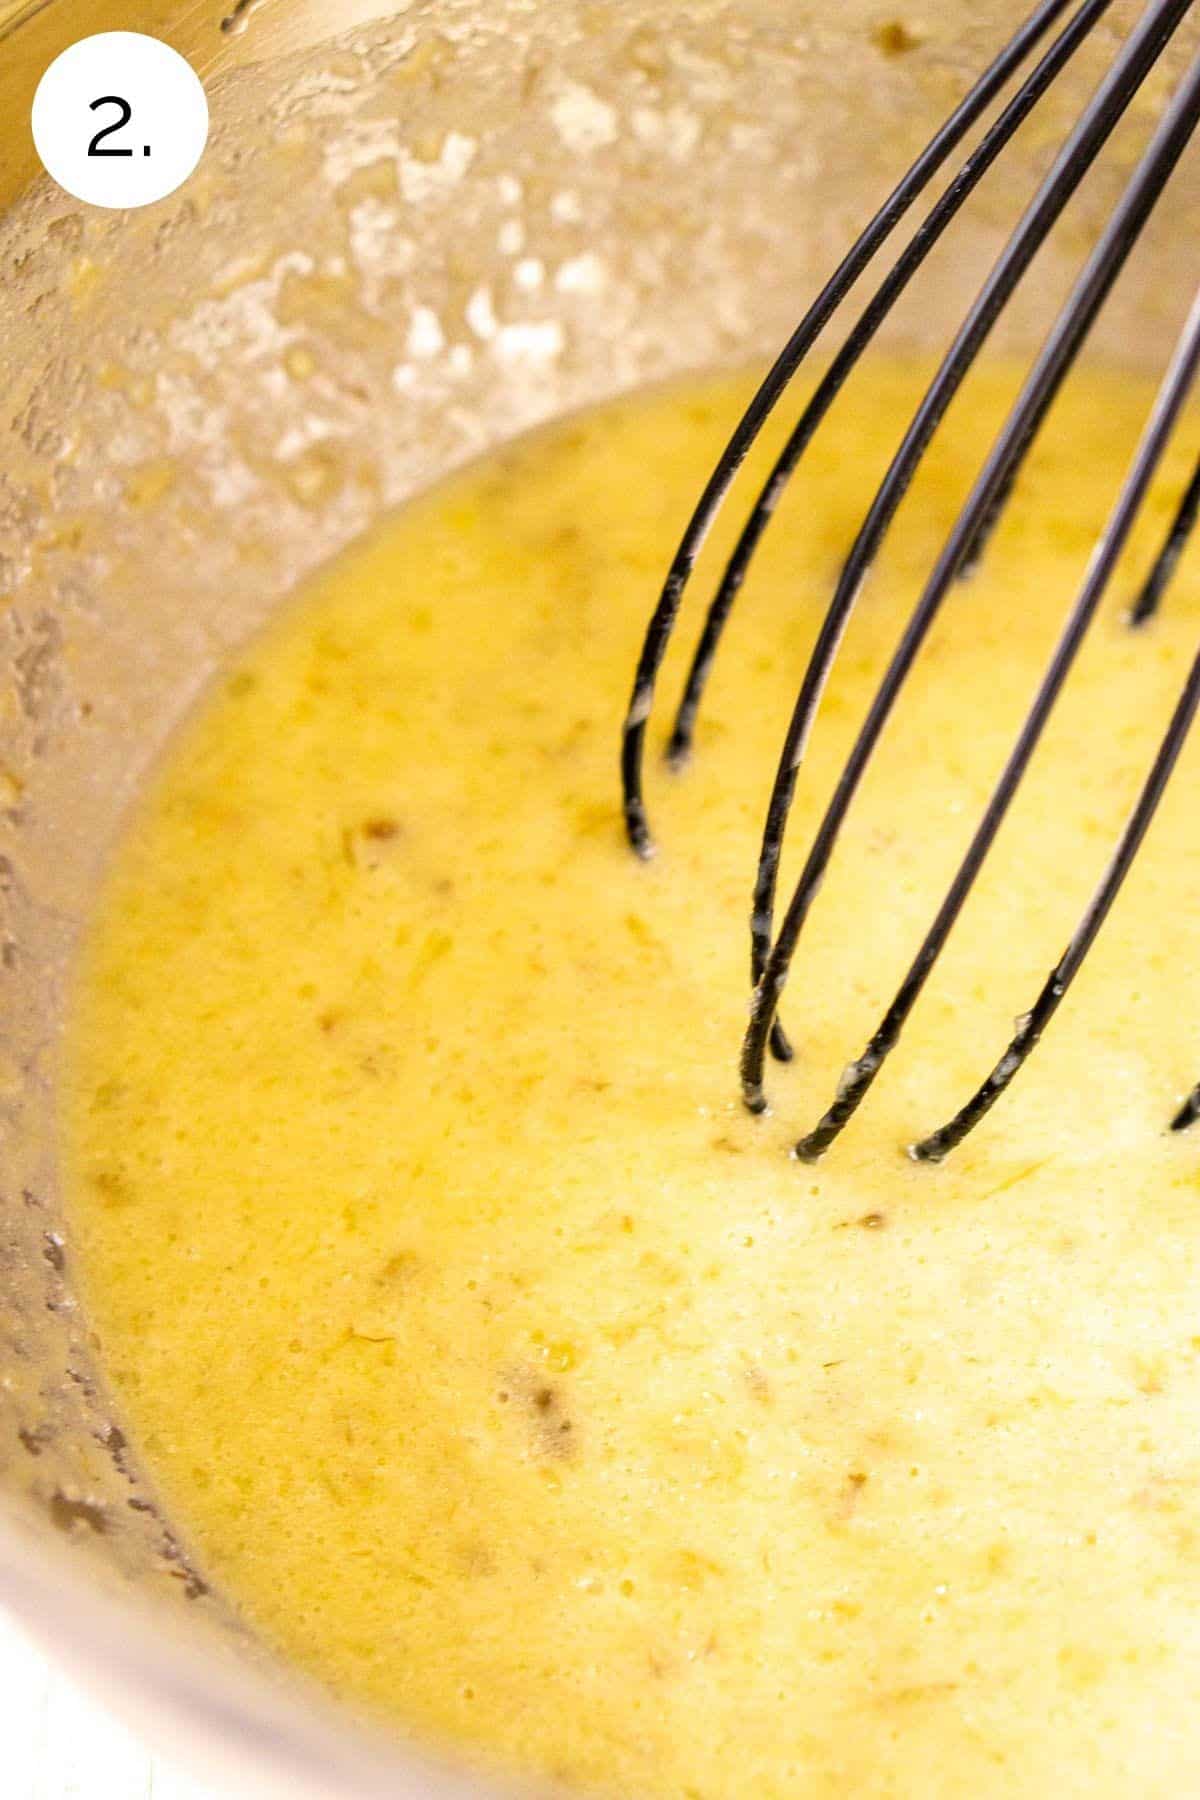 Whisking the wet ingredients together in a large stainless steel mixing bowl.